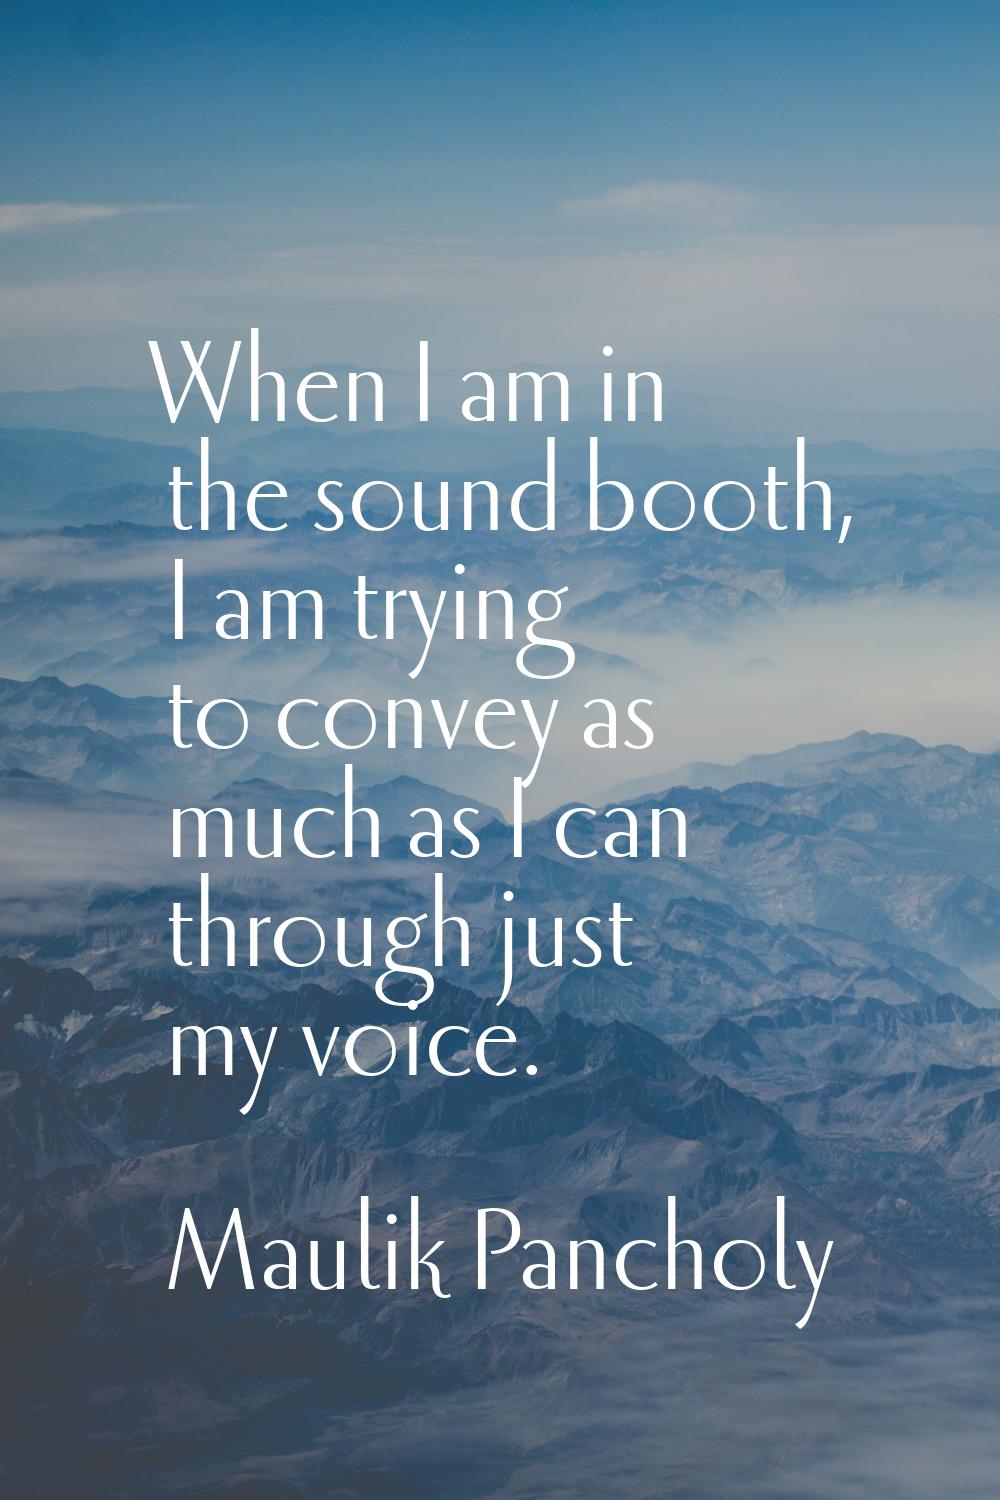 When I am in the sound booth, I am trying to convey as much as I can through just my voice.